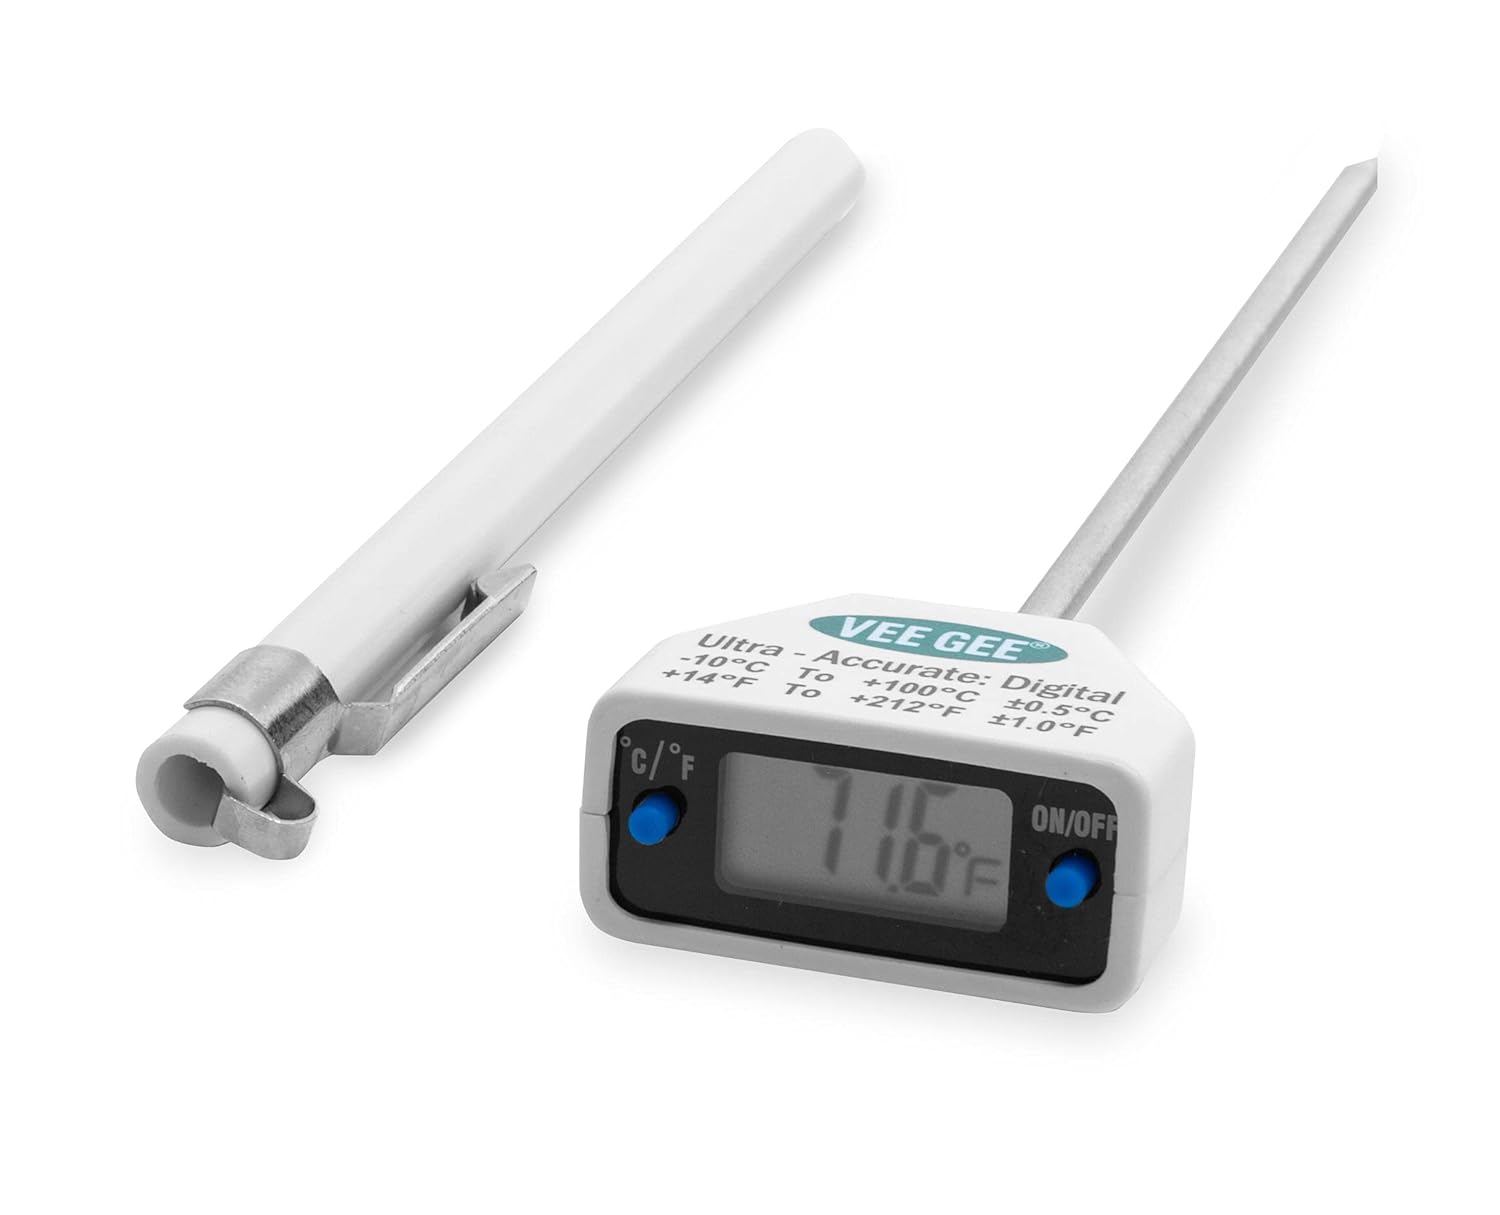 Pocket Thermometer